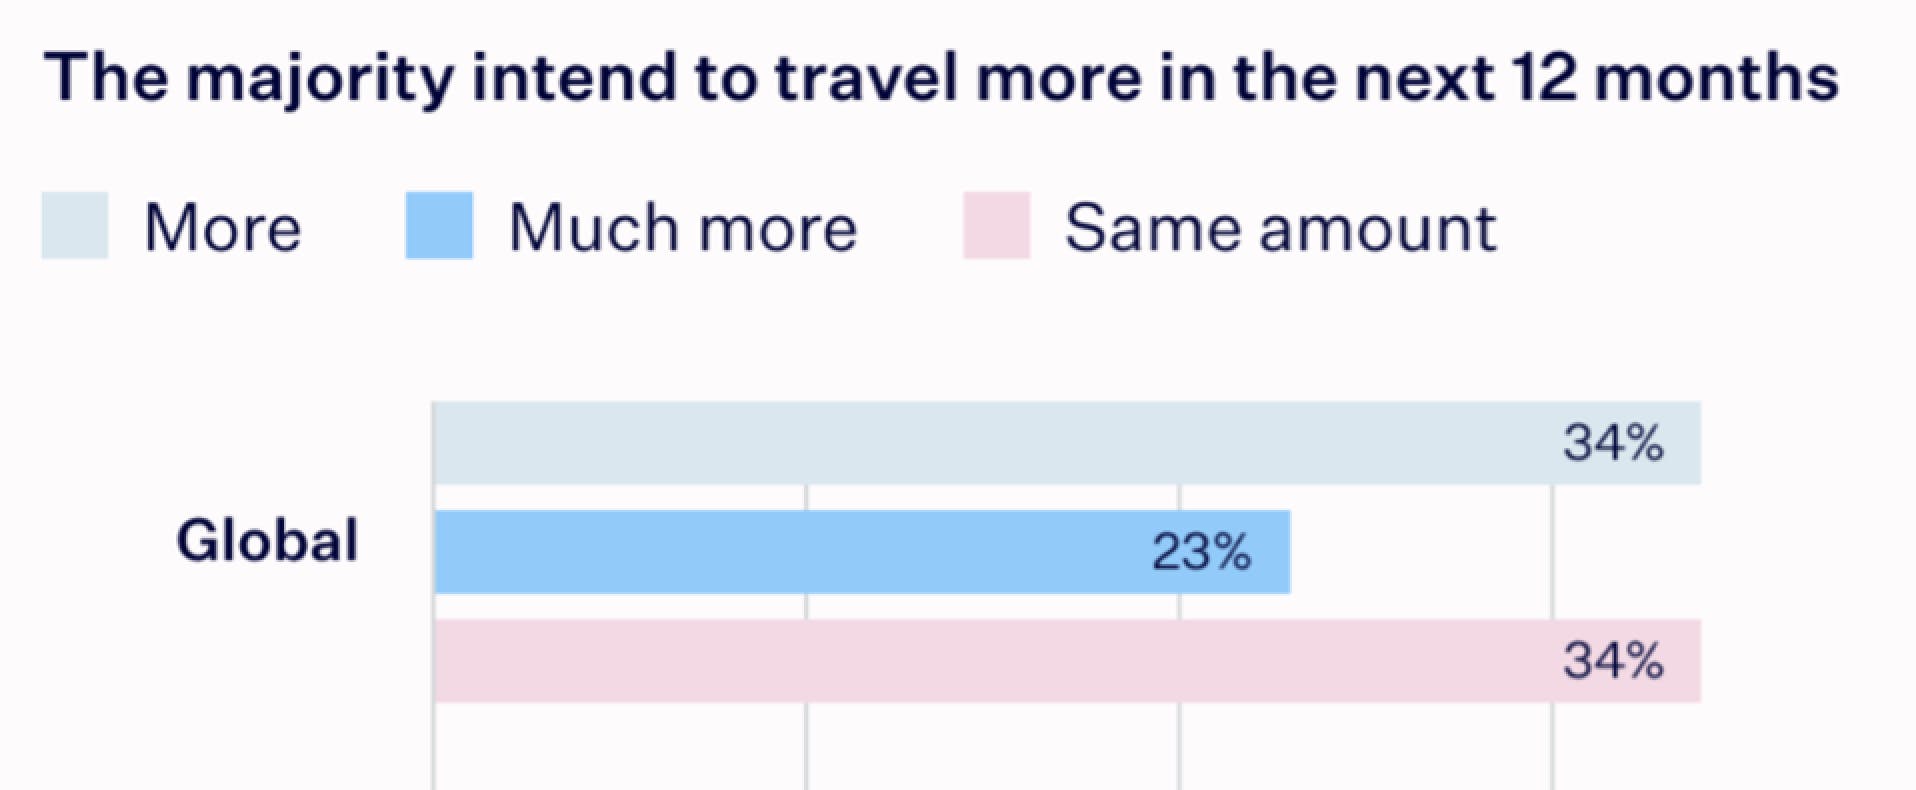 The majority of travellers intends to travel more in the next 12 months